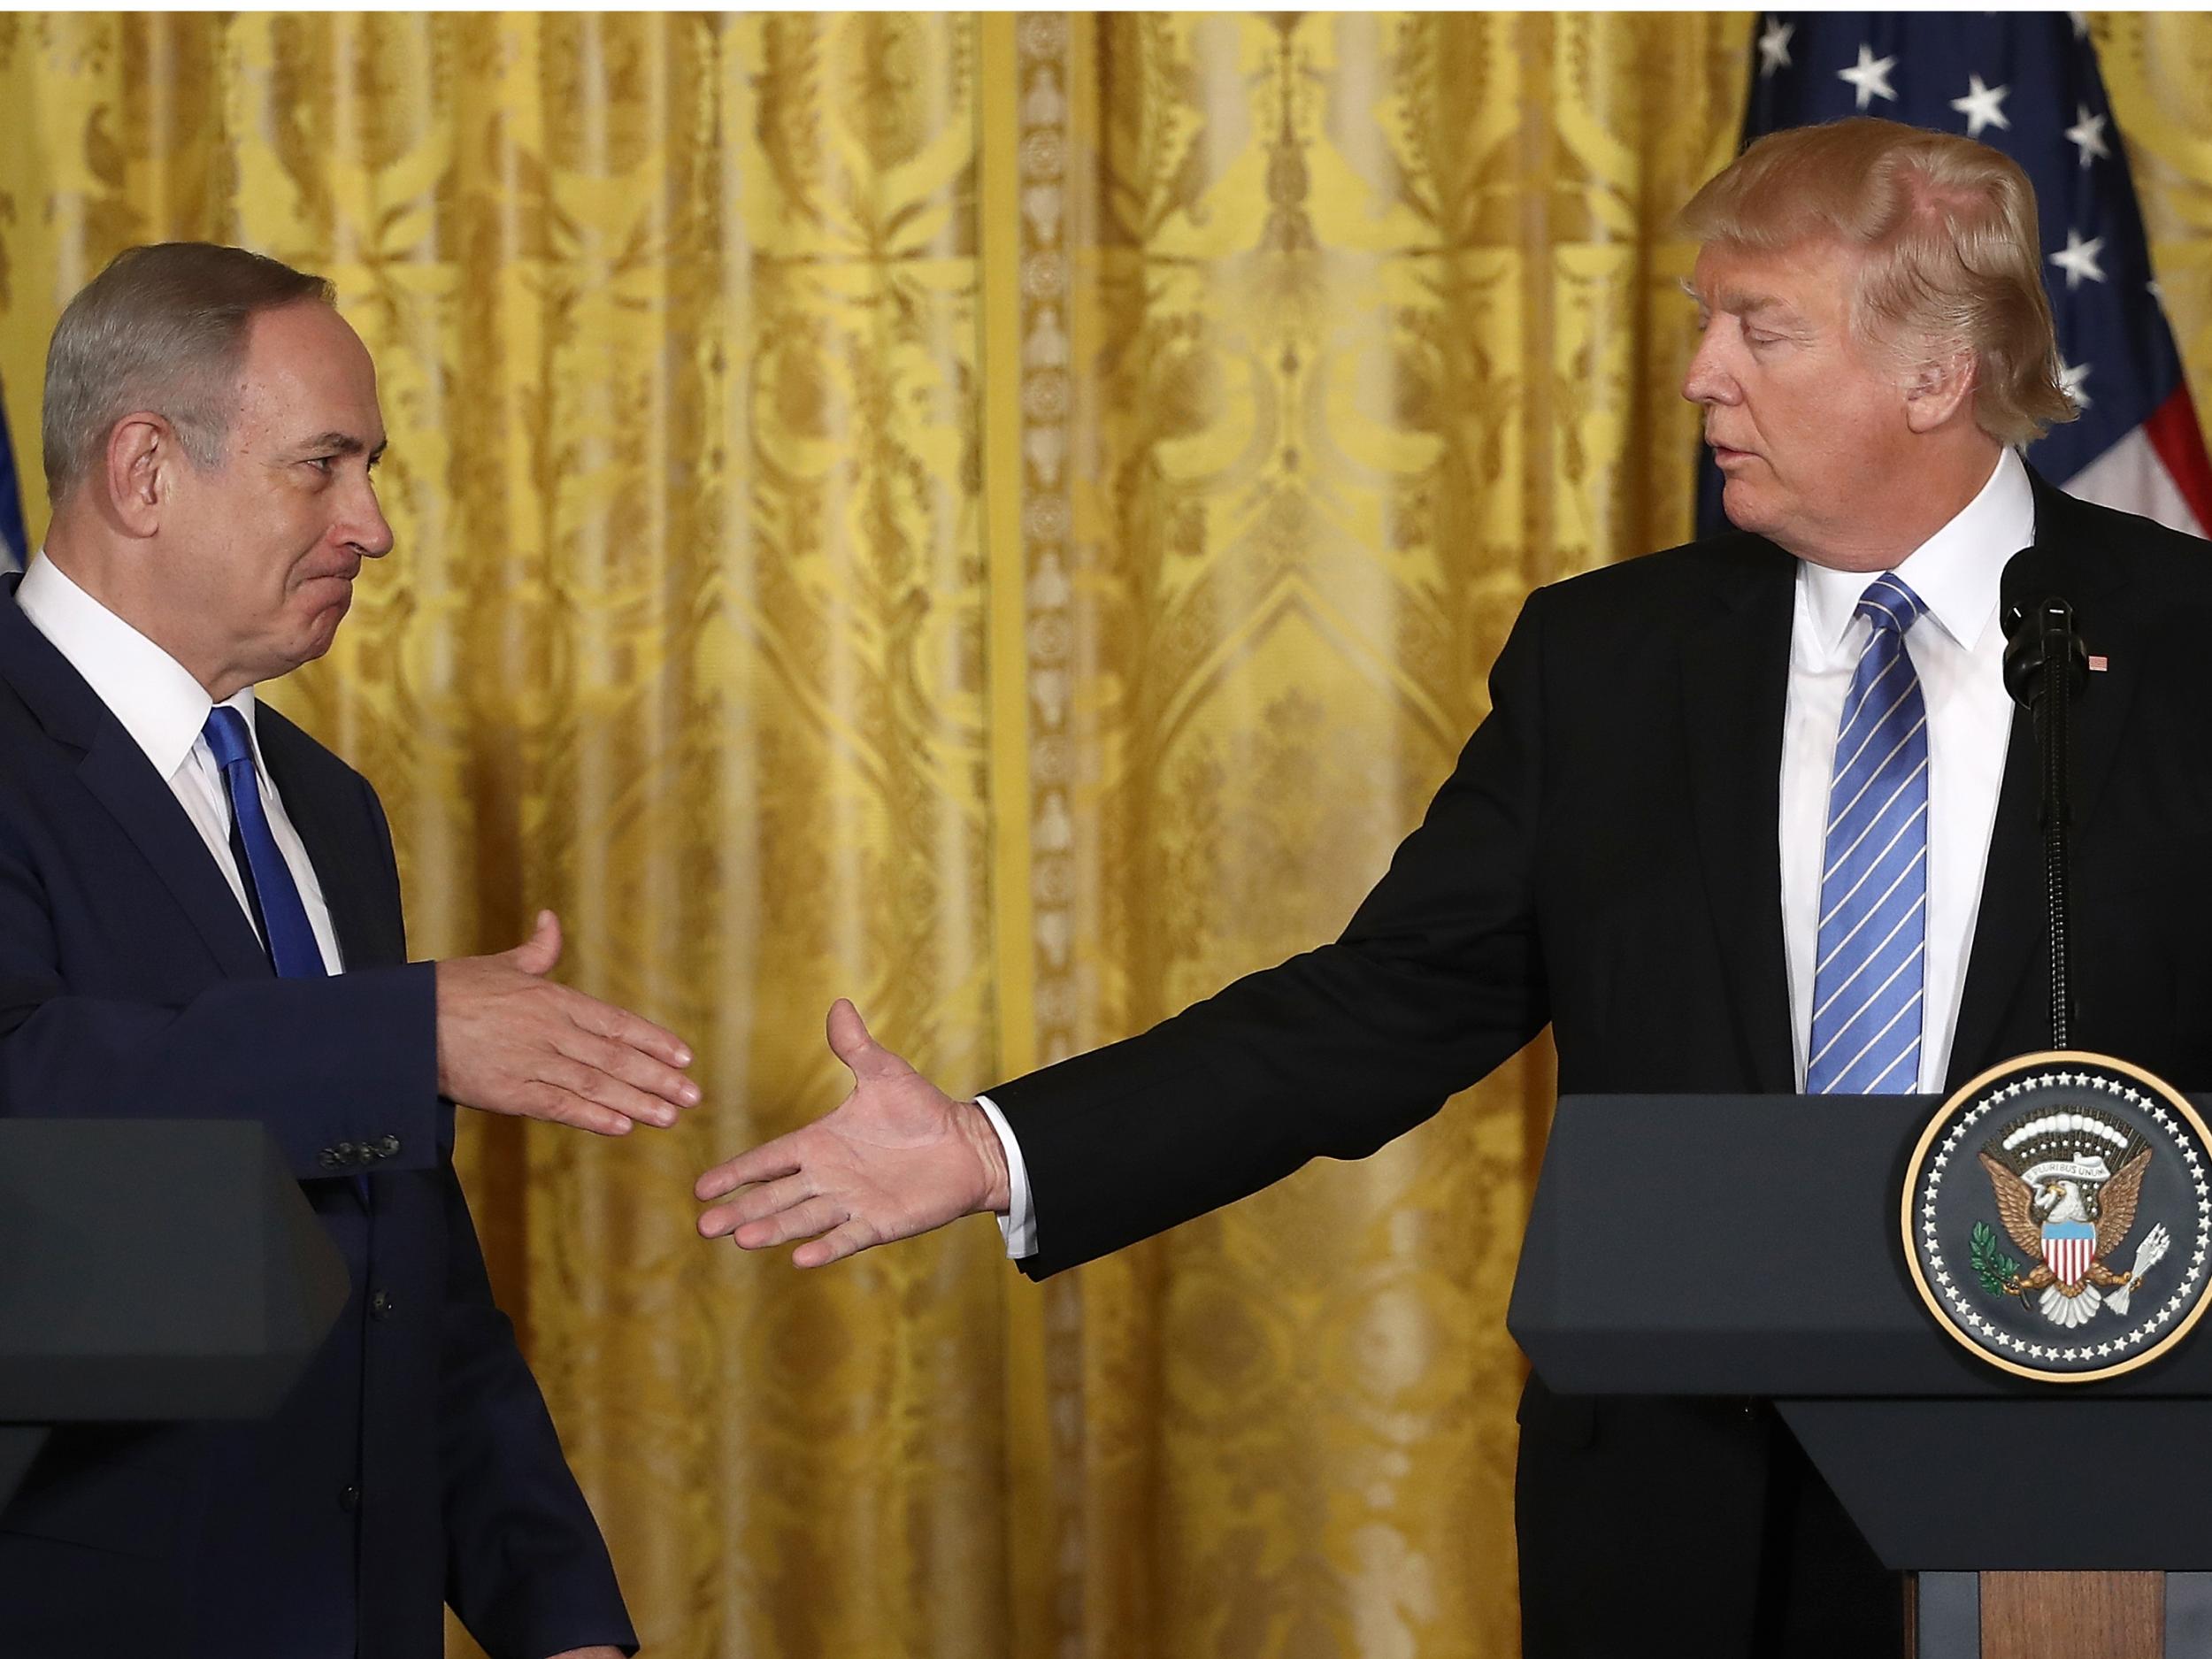 Being Trump’s ‘lackey’ shows weakness – from the outside at least it looks like Trump tweets, Netanyahu obeys